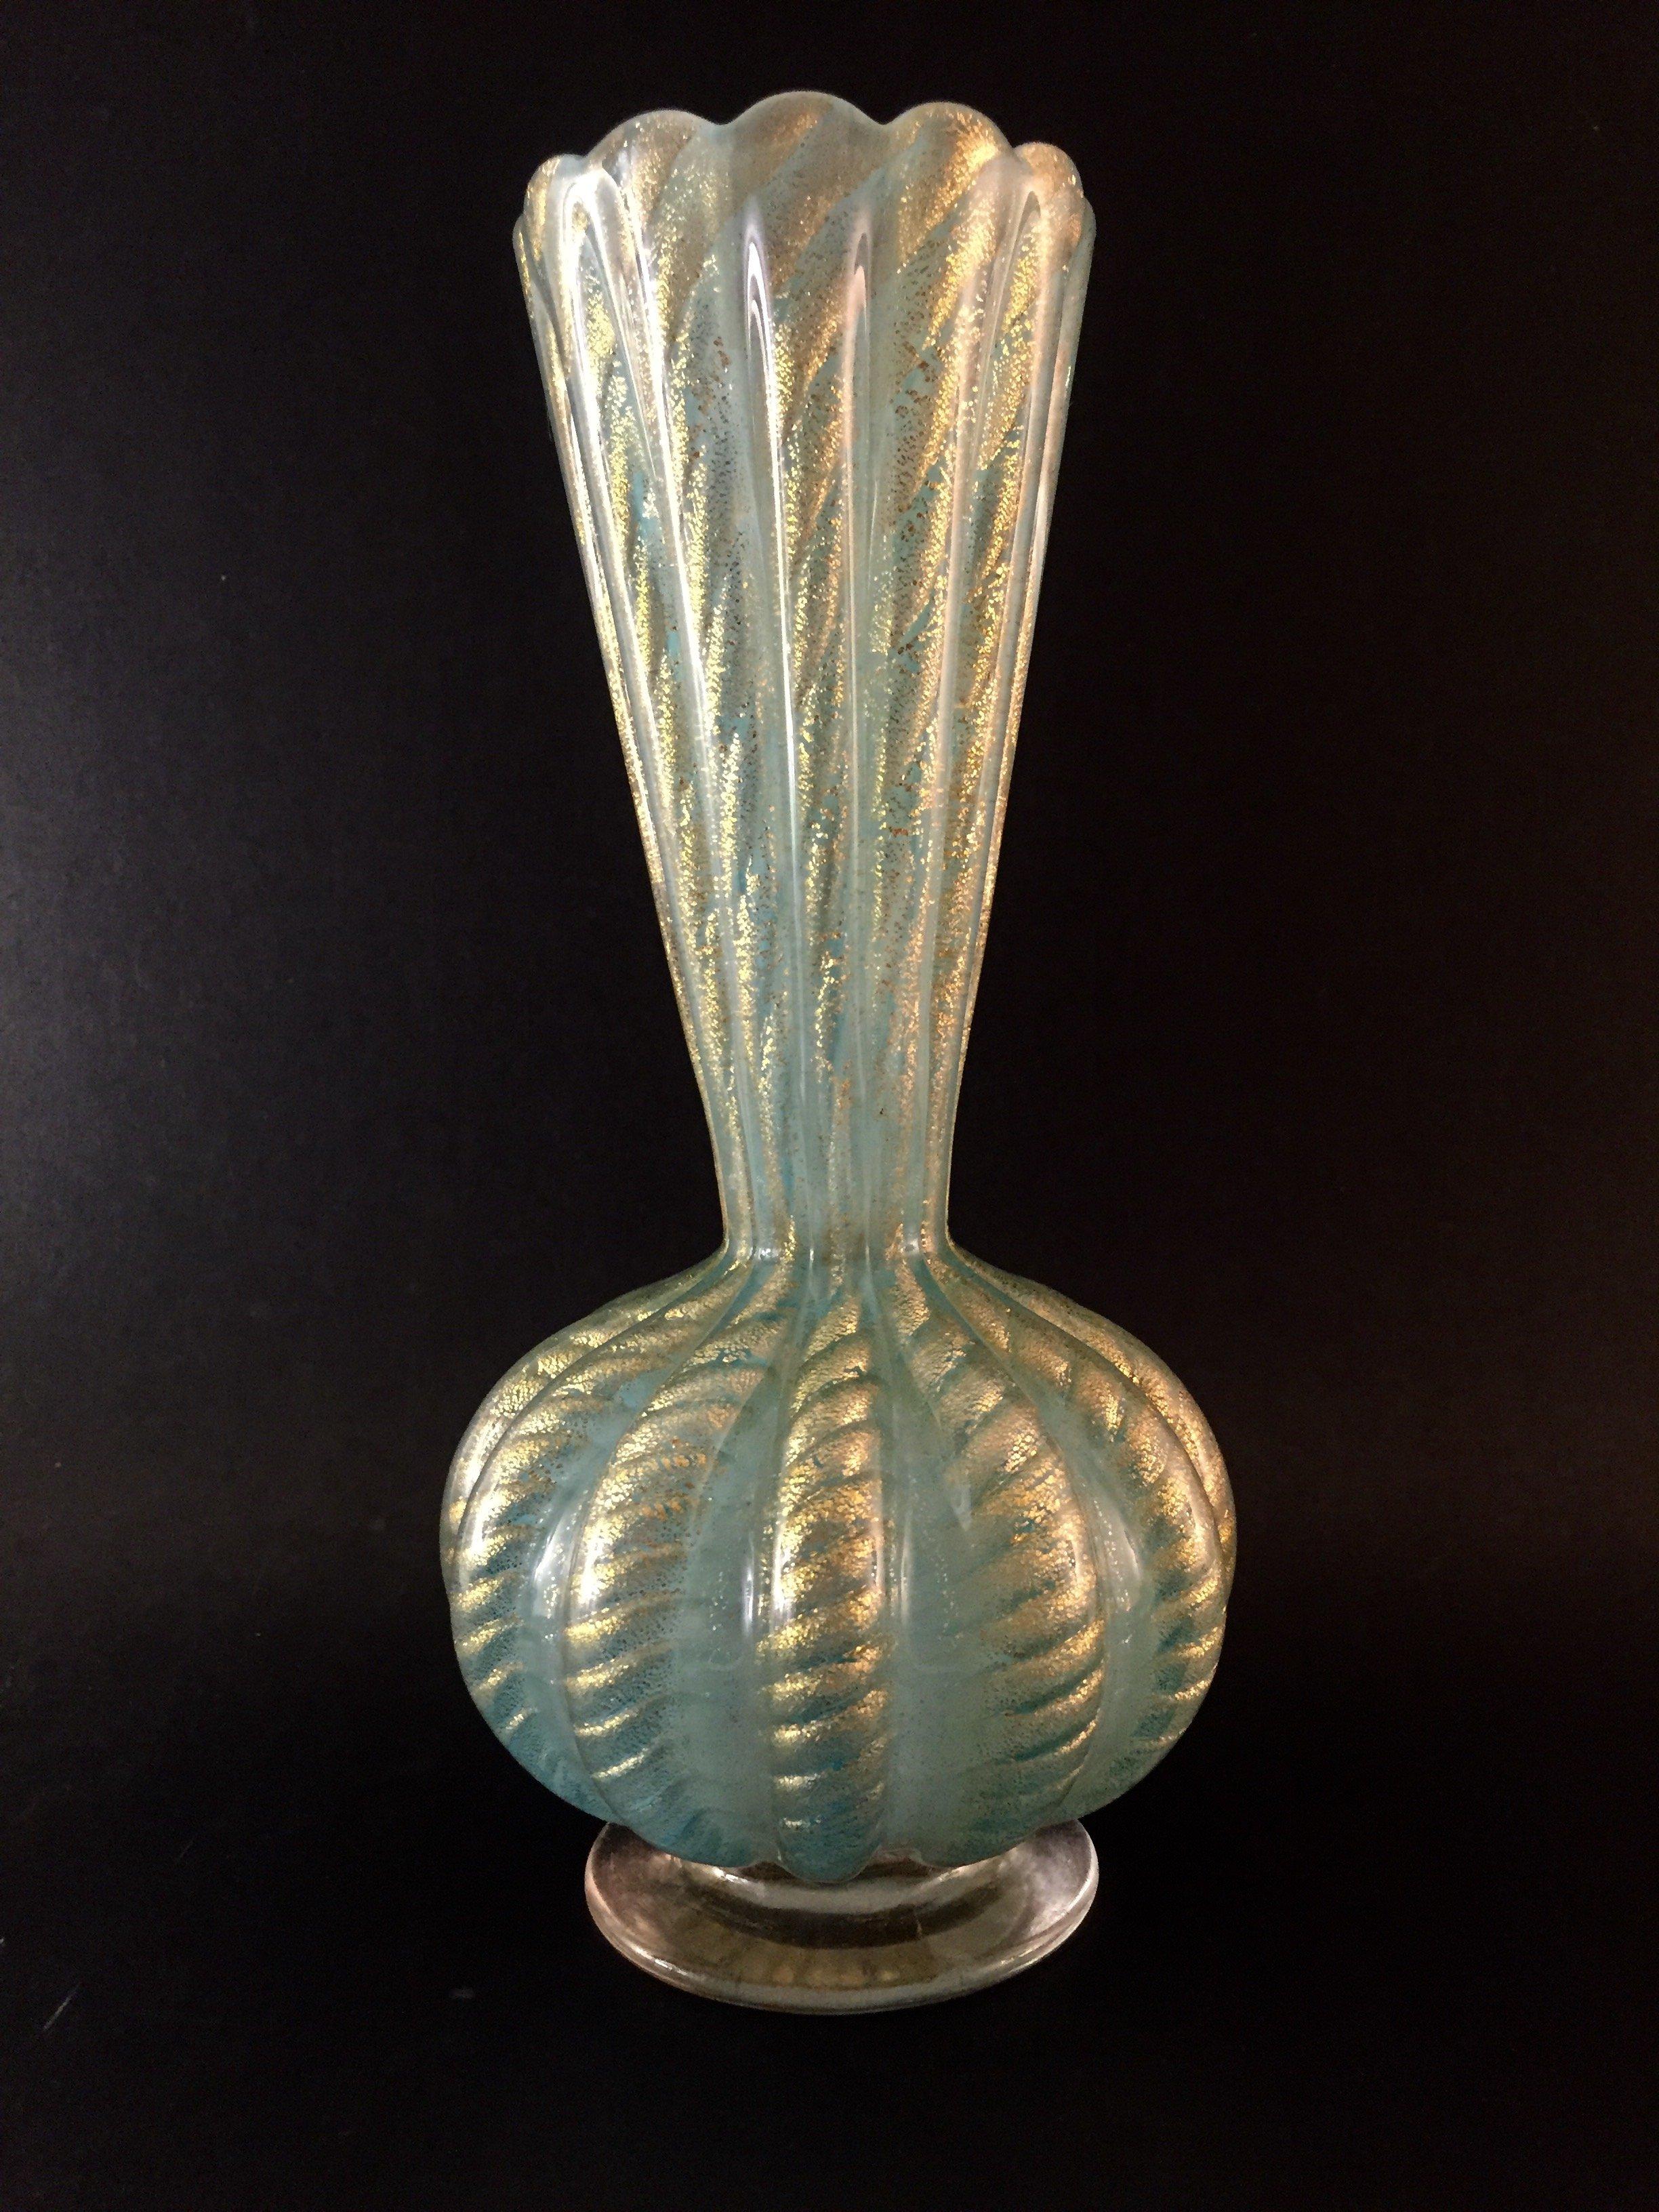 This exquisite 1950s Barovier & Toso vase features an elegant ribbed neck and body in delicate powder blue with swirling gold inclusions. The dazzling gold dust in the ribs gives it stunning definition and presence and at nine and a quarter inches